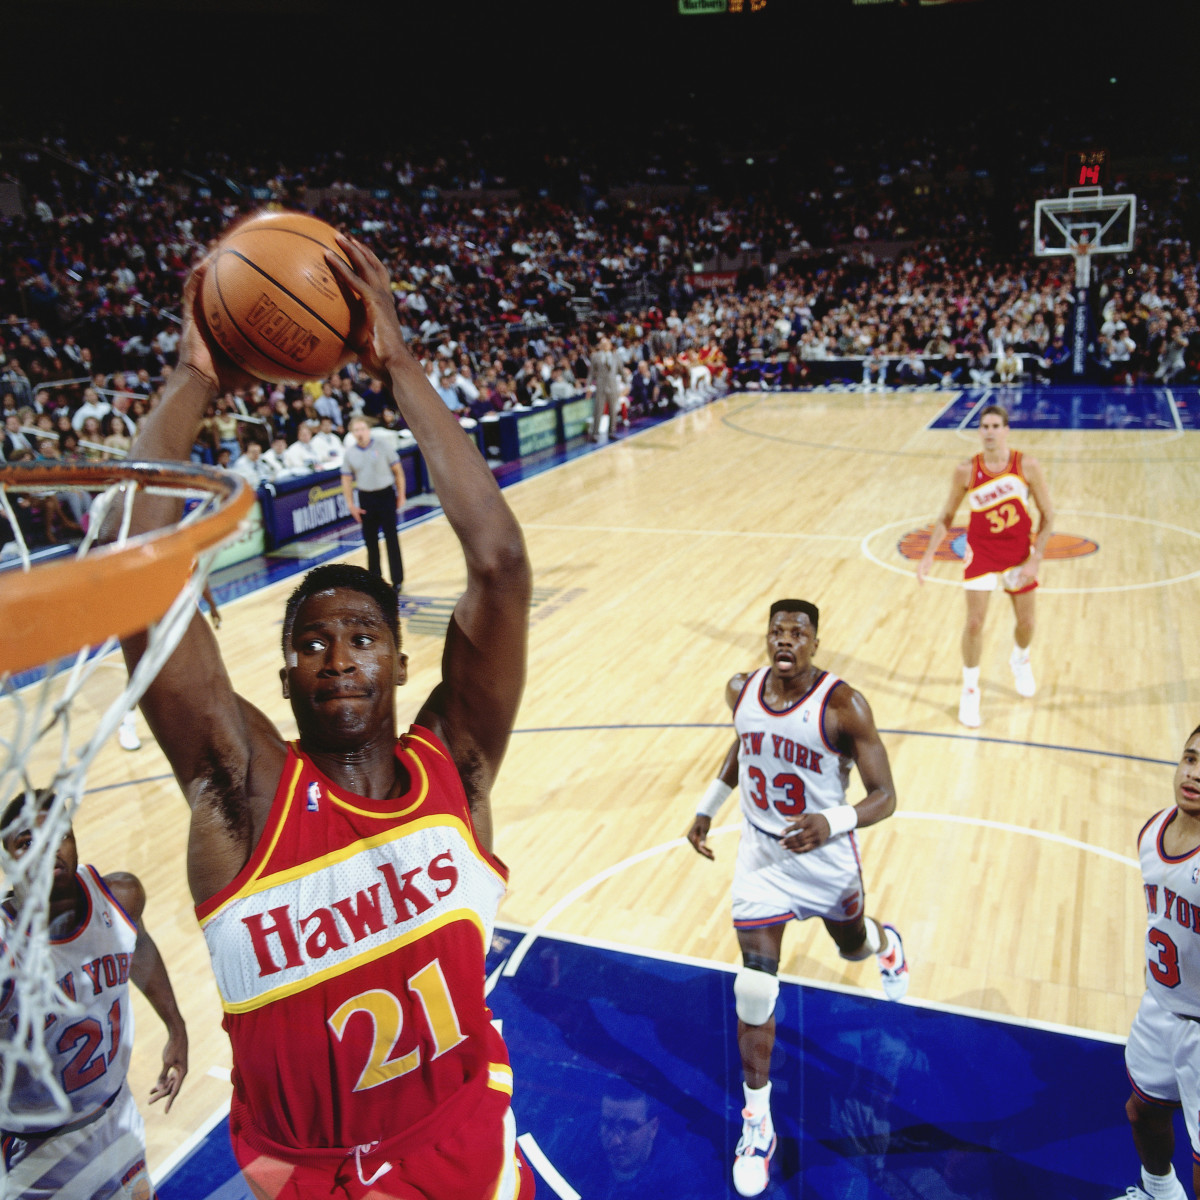 Dominique Wilkins #21 of the Atlanta Hawks goes for a dunk against the New York Knicks during the NBA game on January 1, 1991 at Madison Square Garden in New York, New York. 